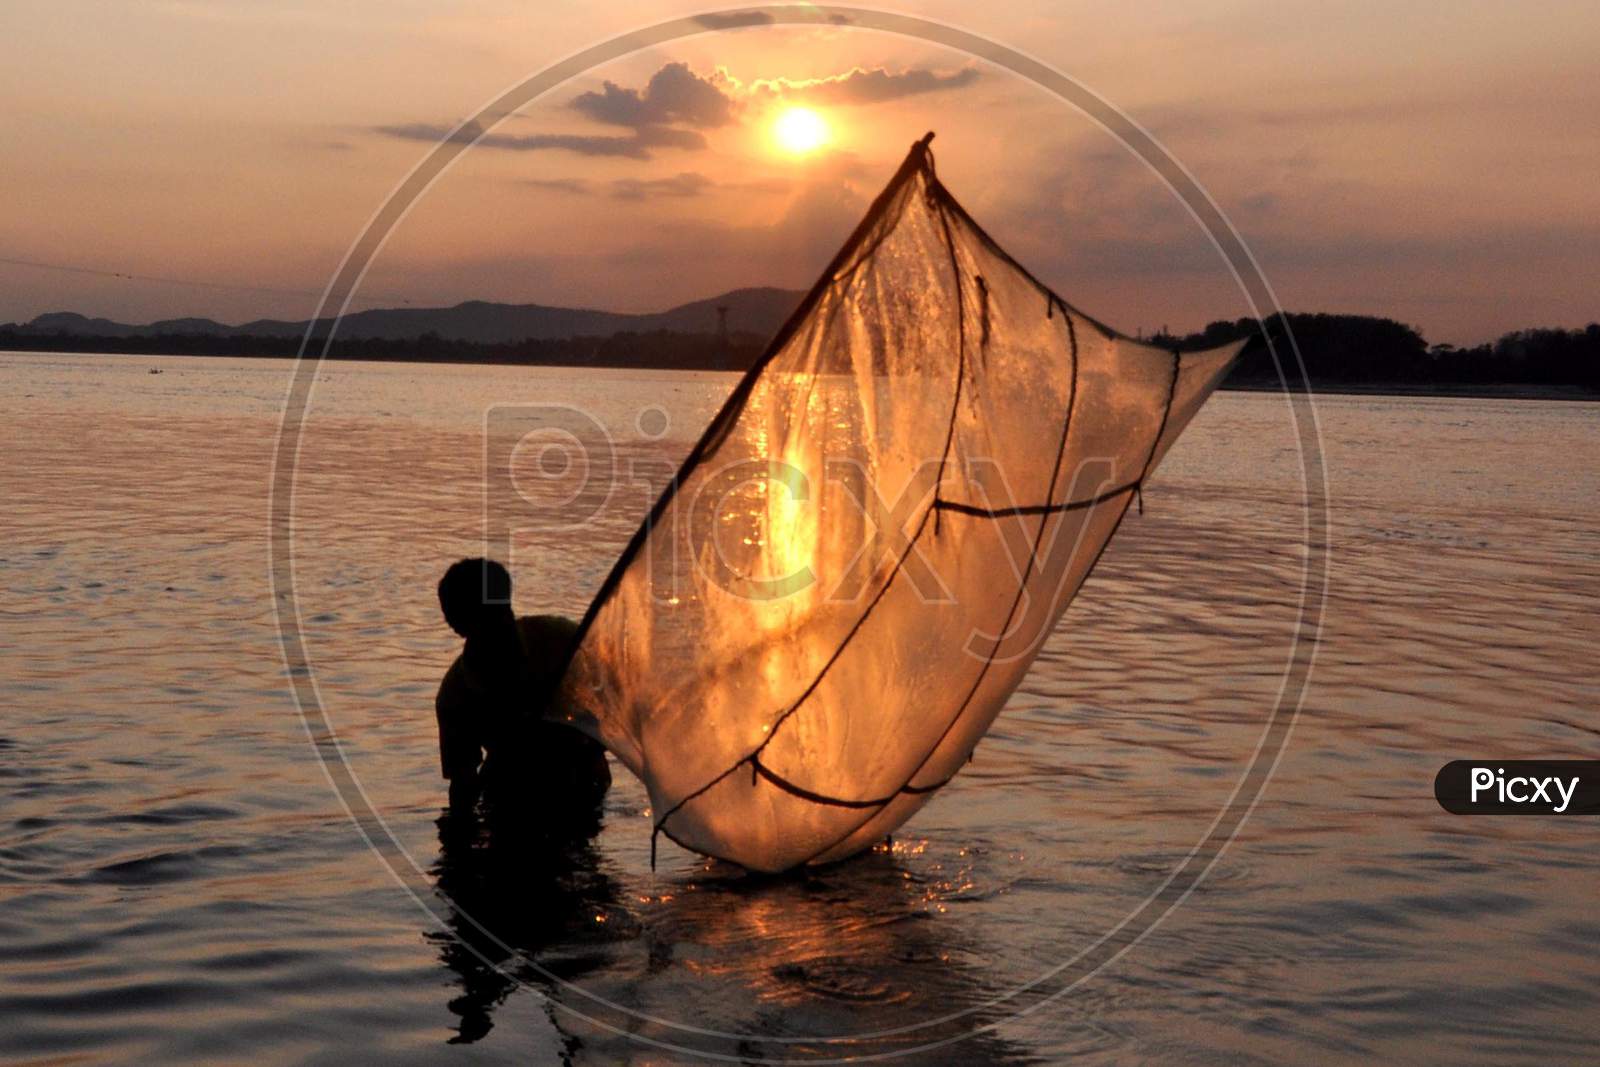 A Man Catches Fish At The Banks Of The Brahmaputra River During Sunset  In Guwahati, Saturday, May 9, 2020.